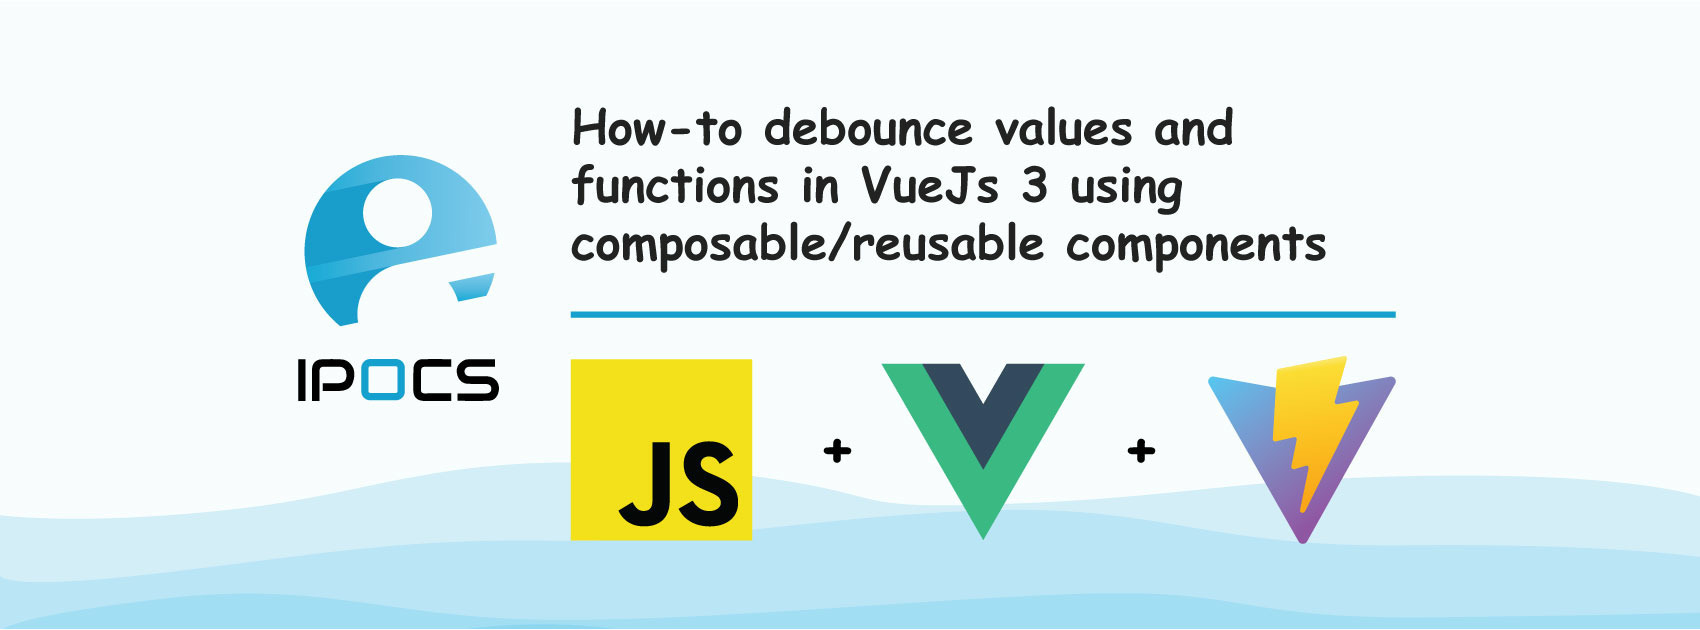 How-to debounce values and functions in VueJS 3 using composable components